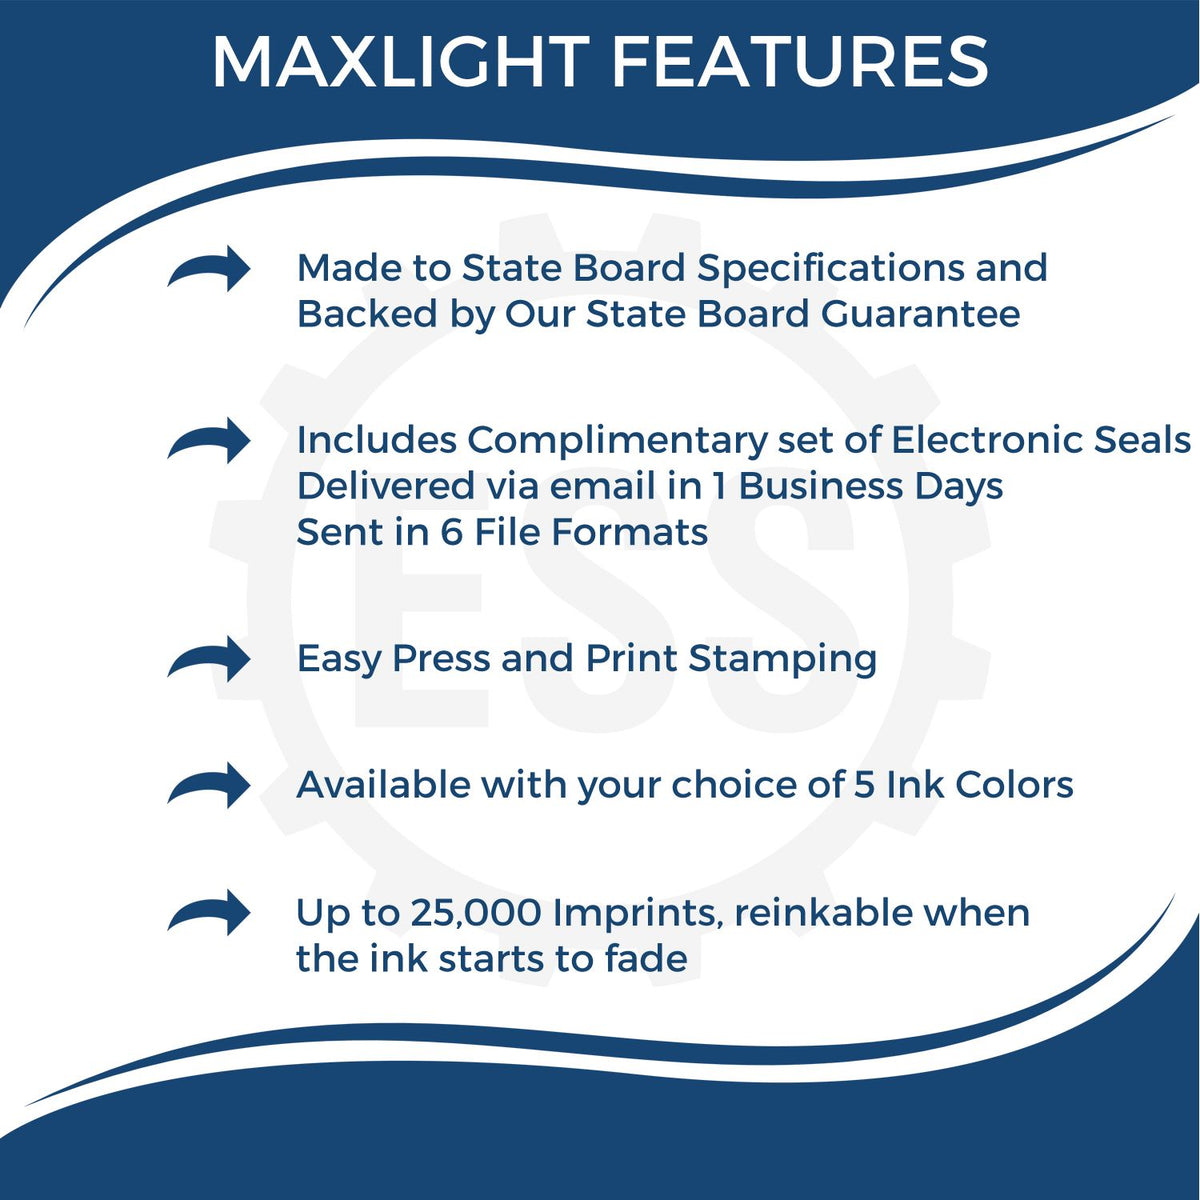 A picture of an infographic highlighting the selling points for the Premium MaxLight Pre-Inked Illinois Engineering Stamp